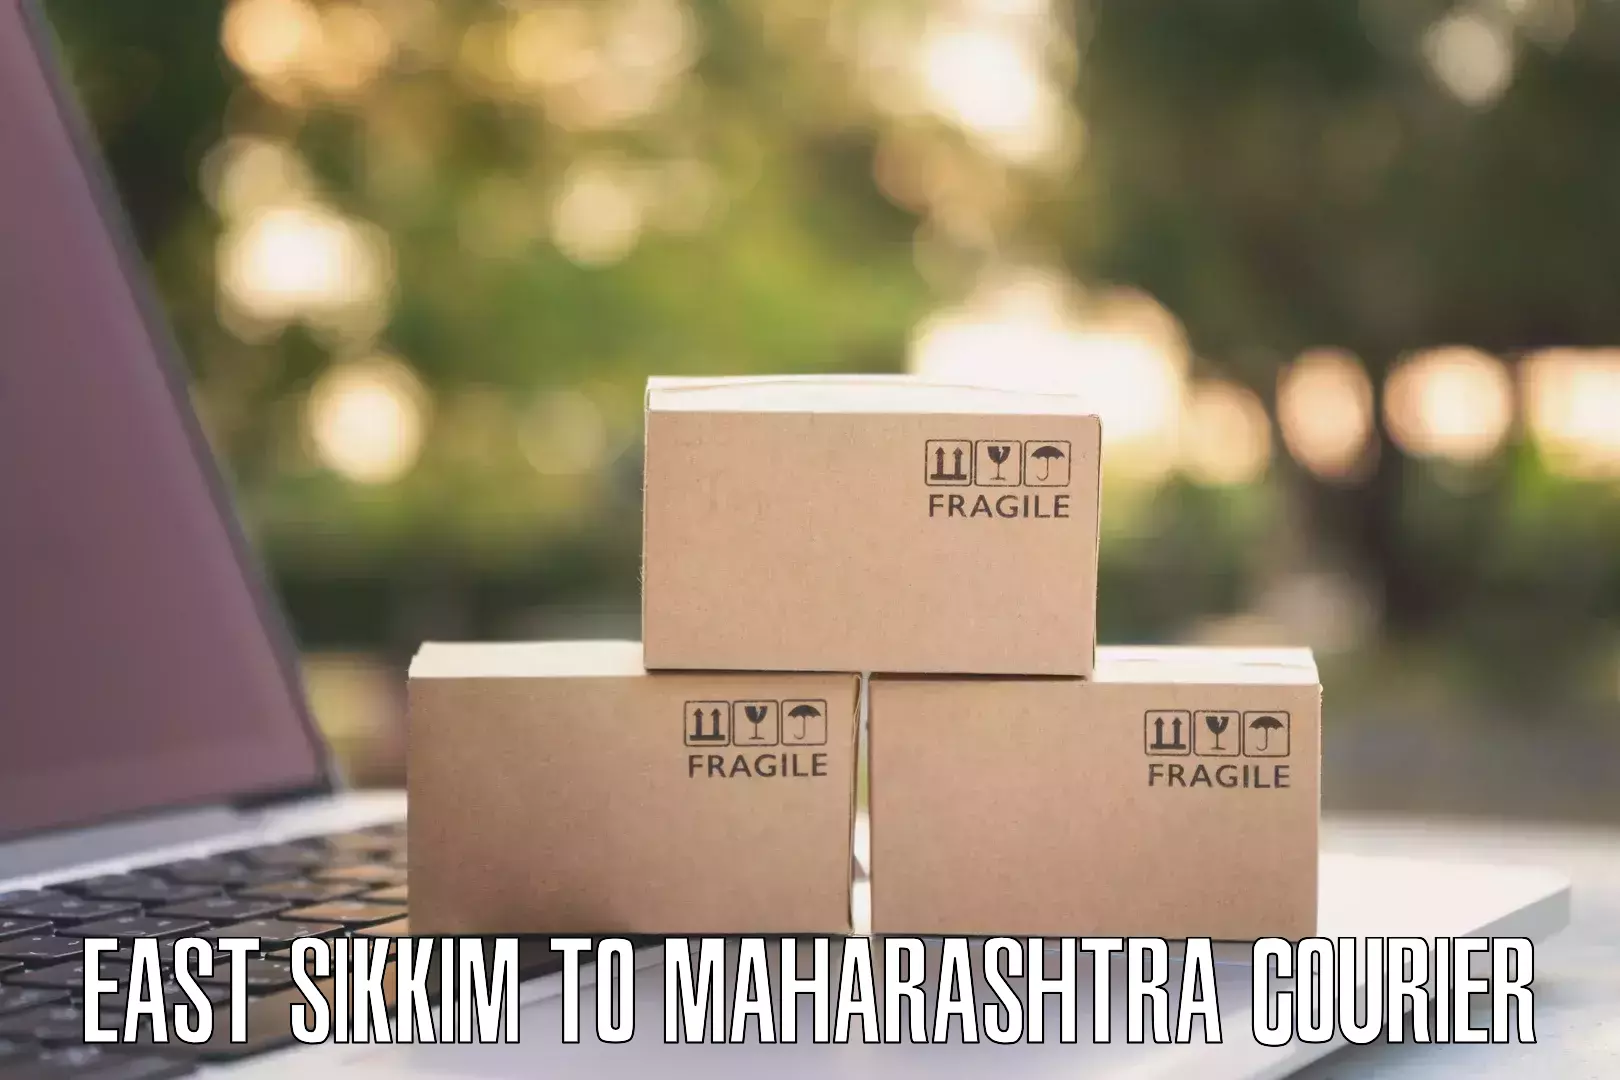 Global shipping networks East Sikkim to Jafrabad Jalna